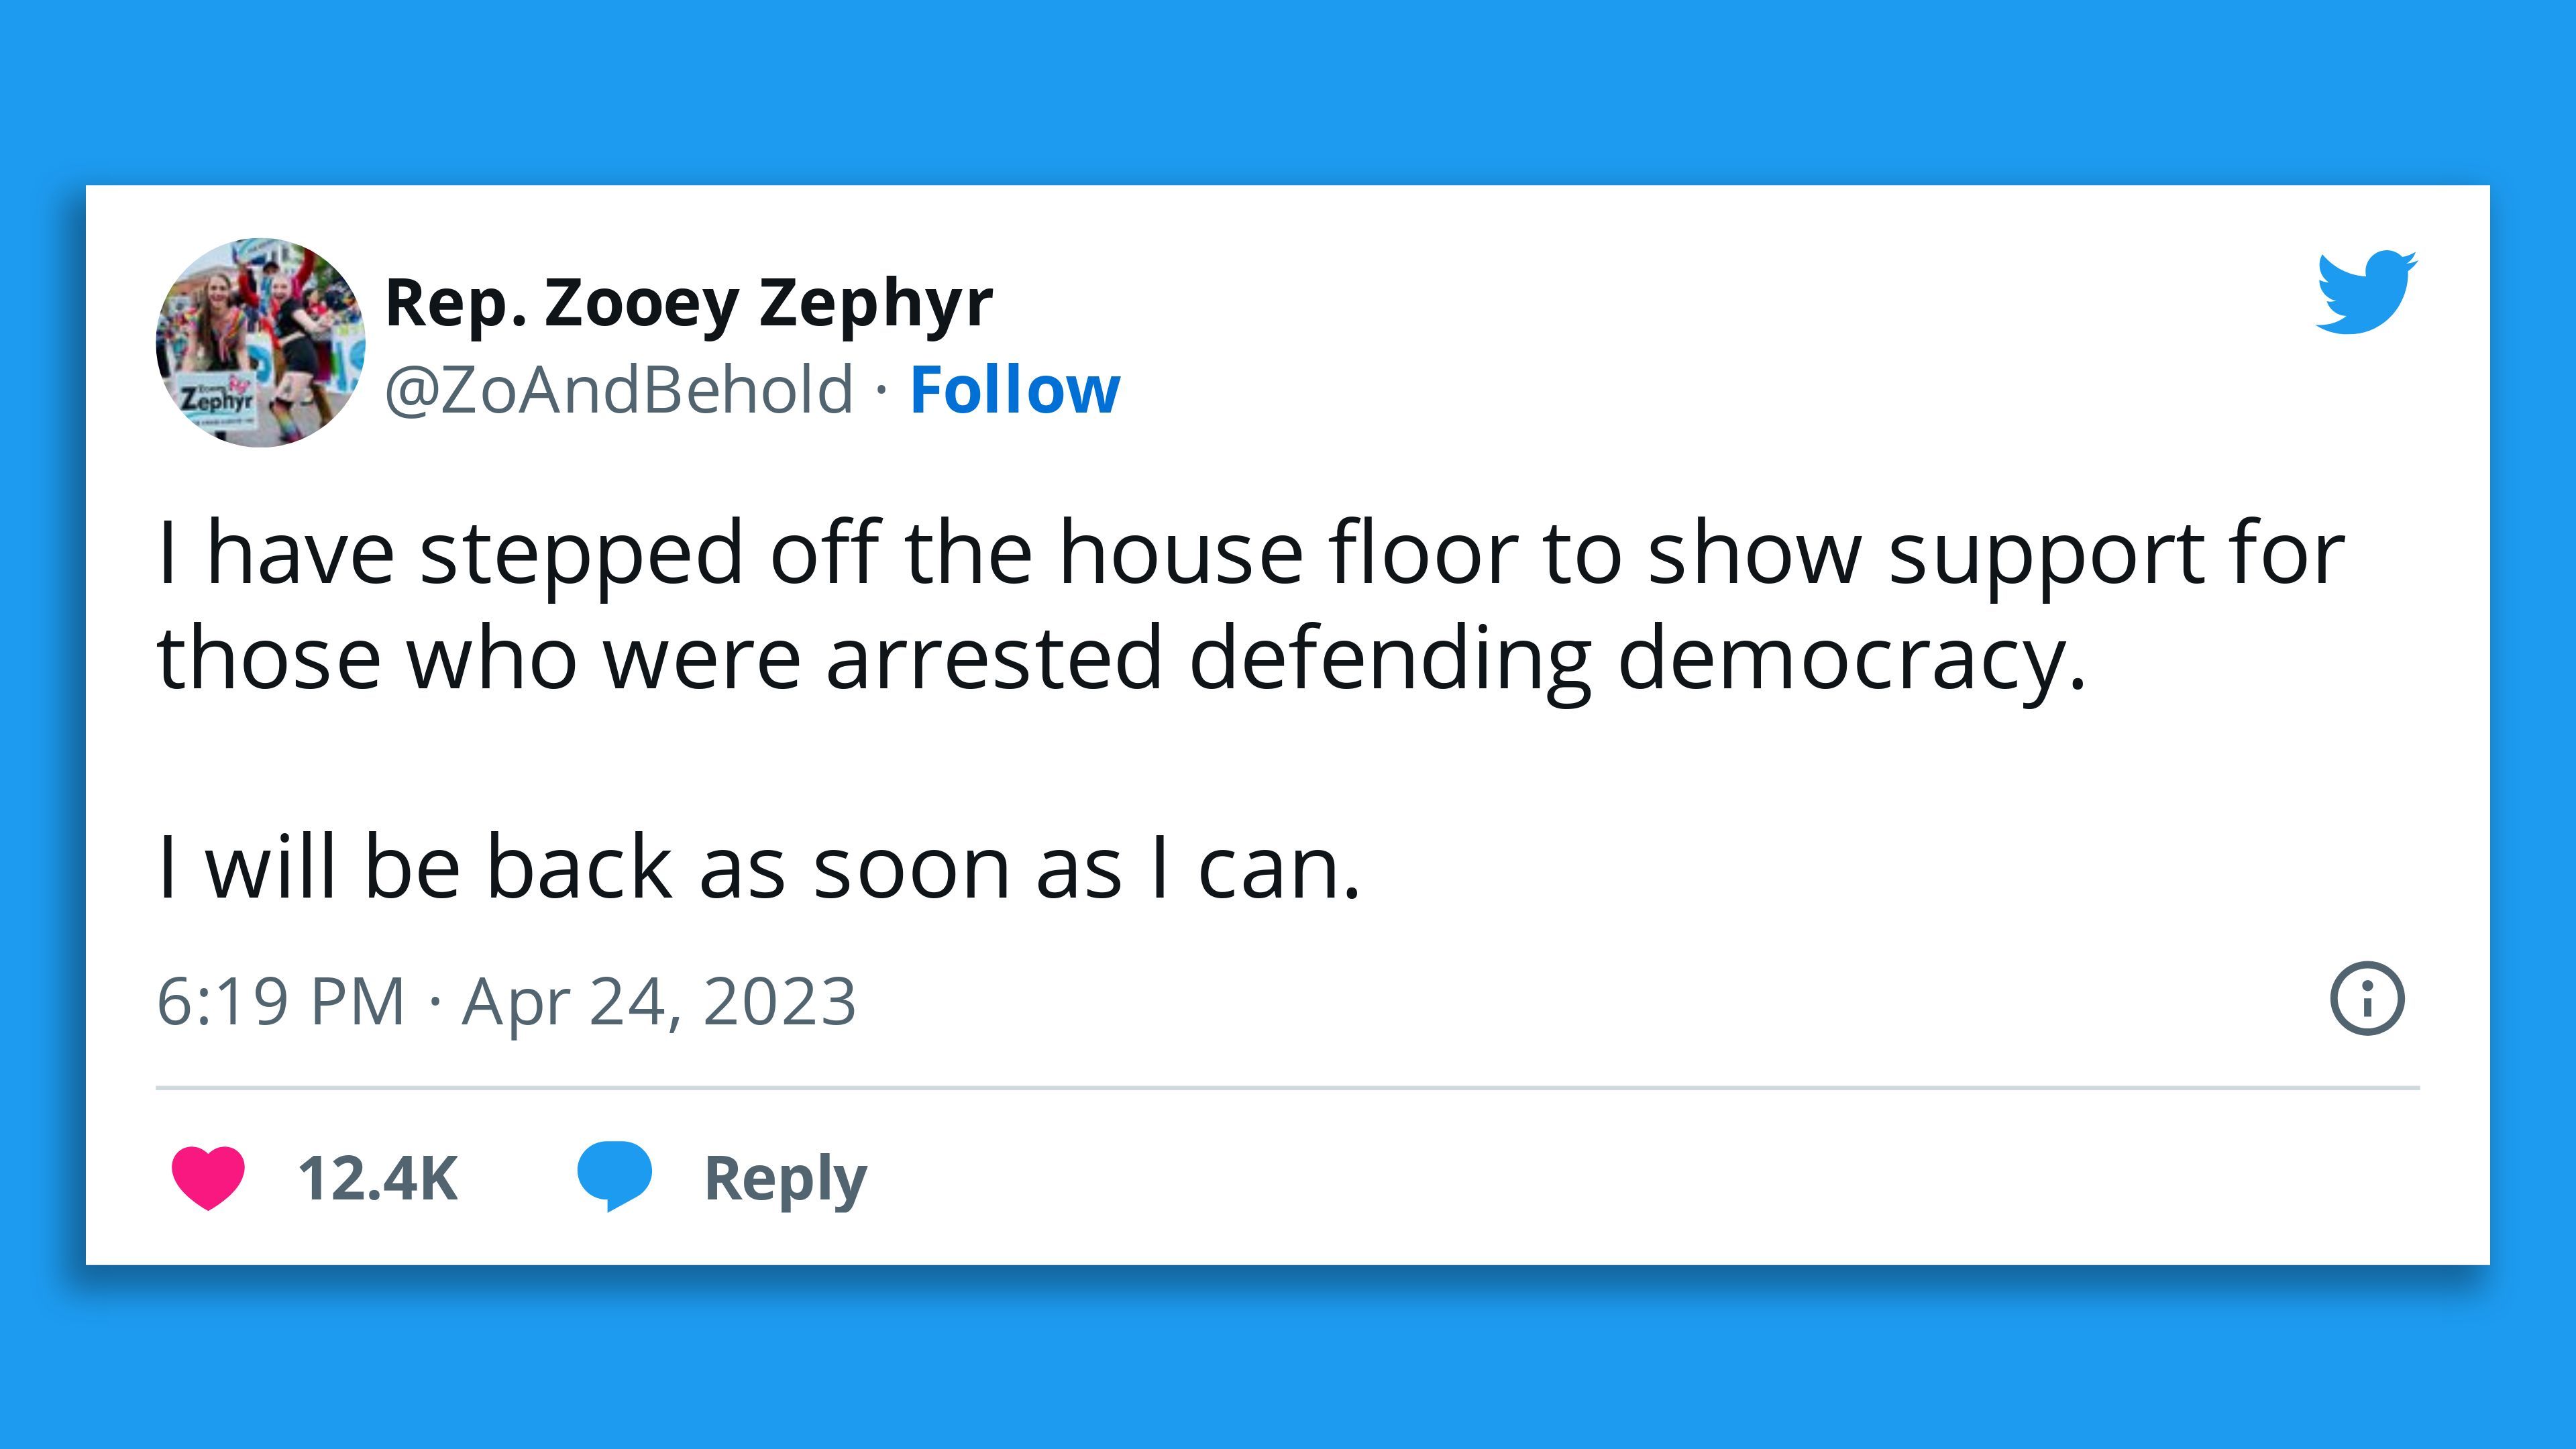 A screenshot of a tweet from Montana state Rep. Zooey Zephyr saying: "I have stepped off the house floor to show support for those who were arrested defending democracy."